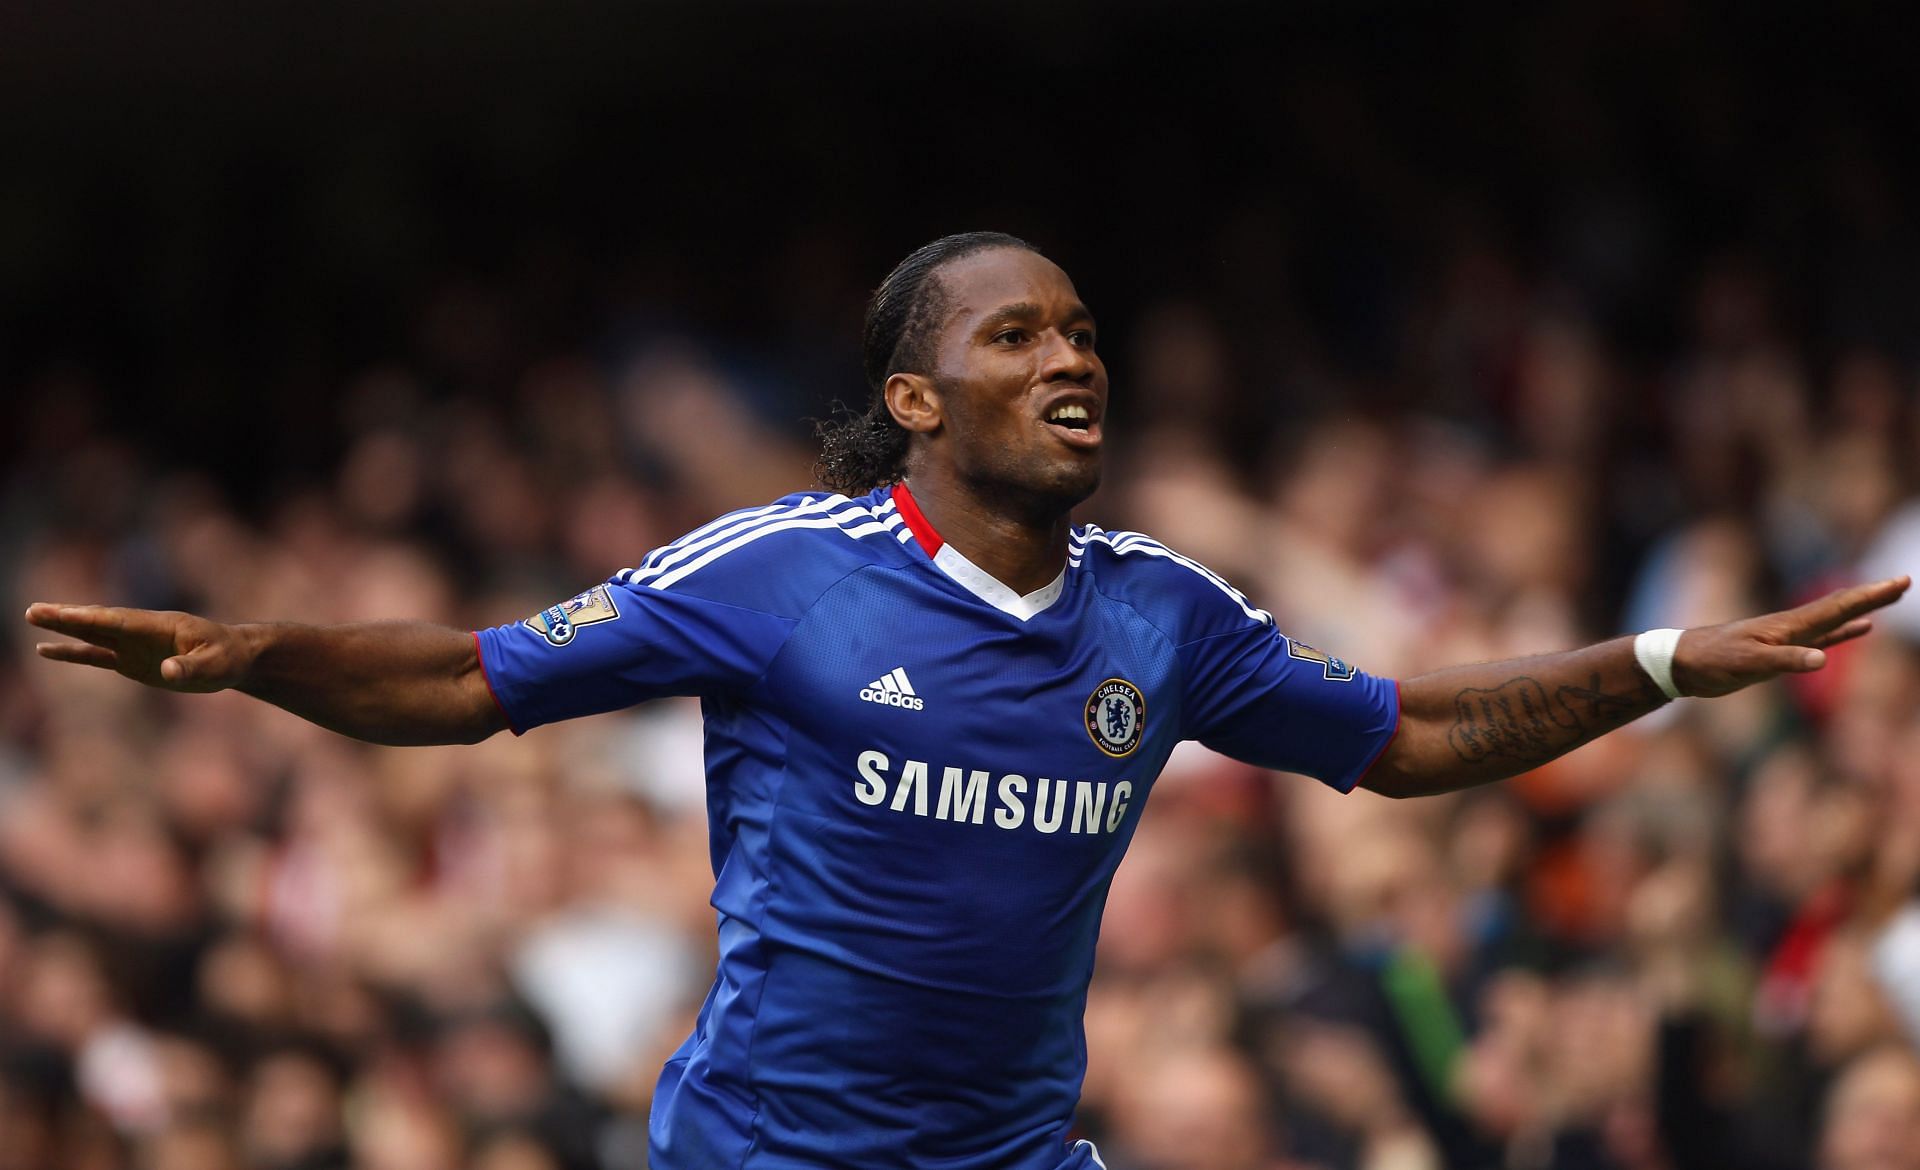 Didier Drogba scored a lot of goals against Arsenal.